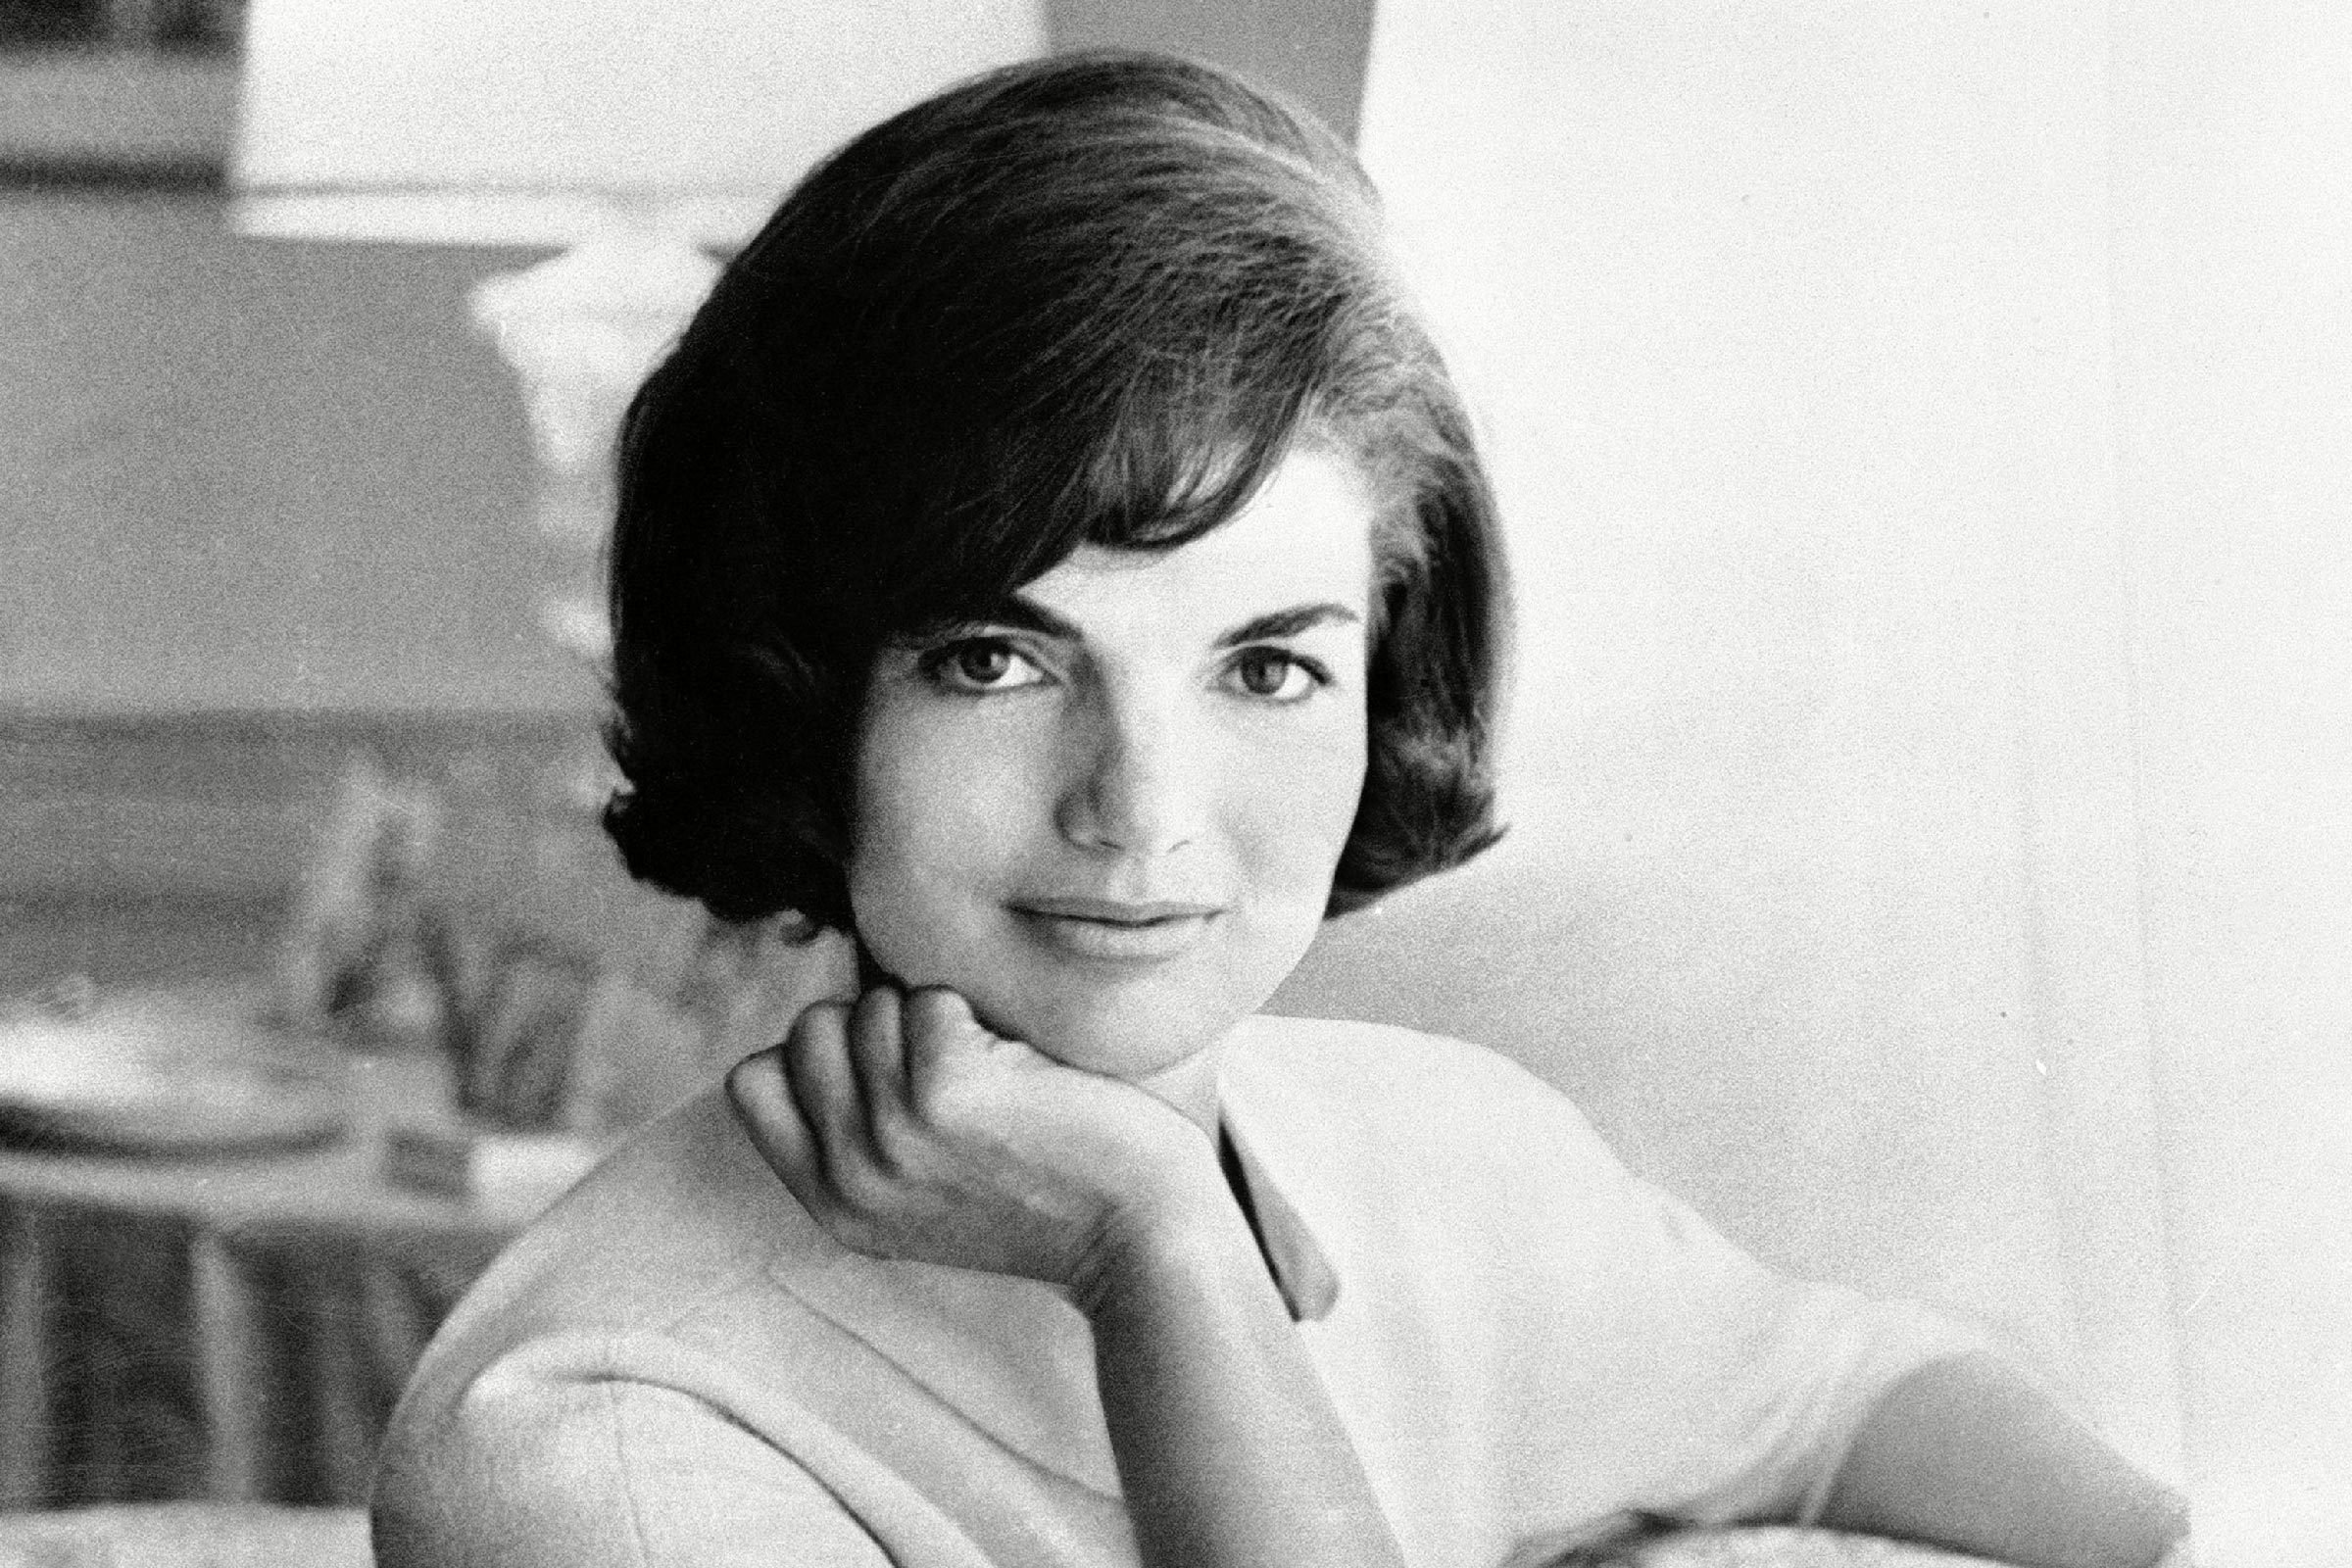 The Marriage Proposal Jackie Kennedy Turned Down